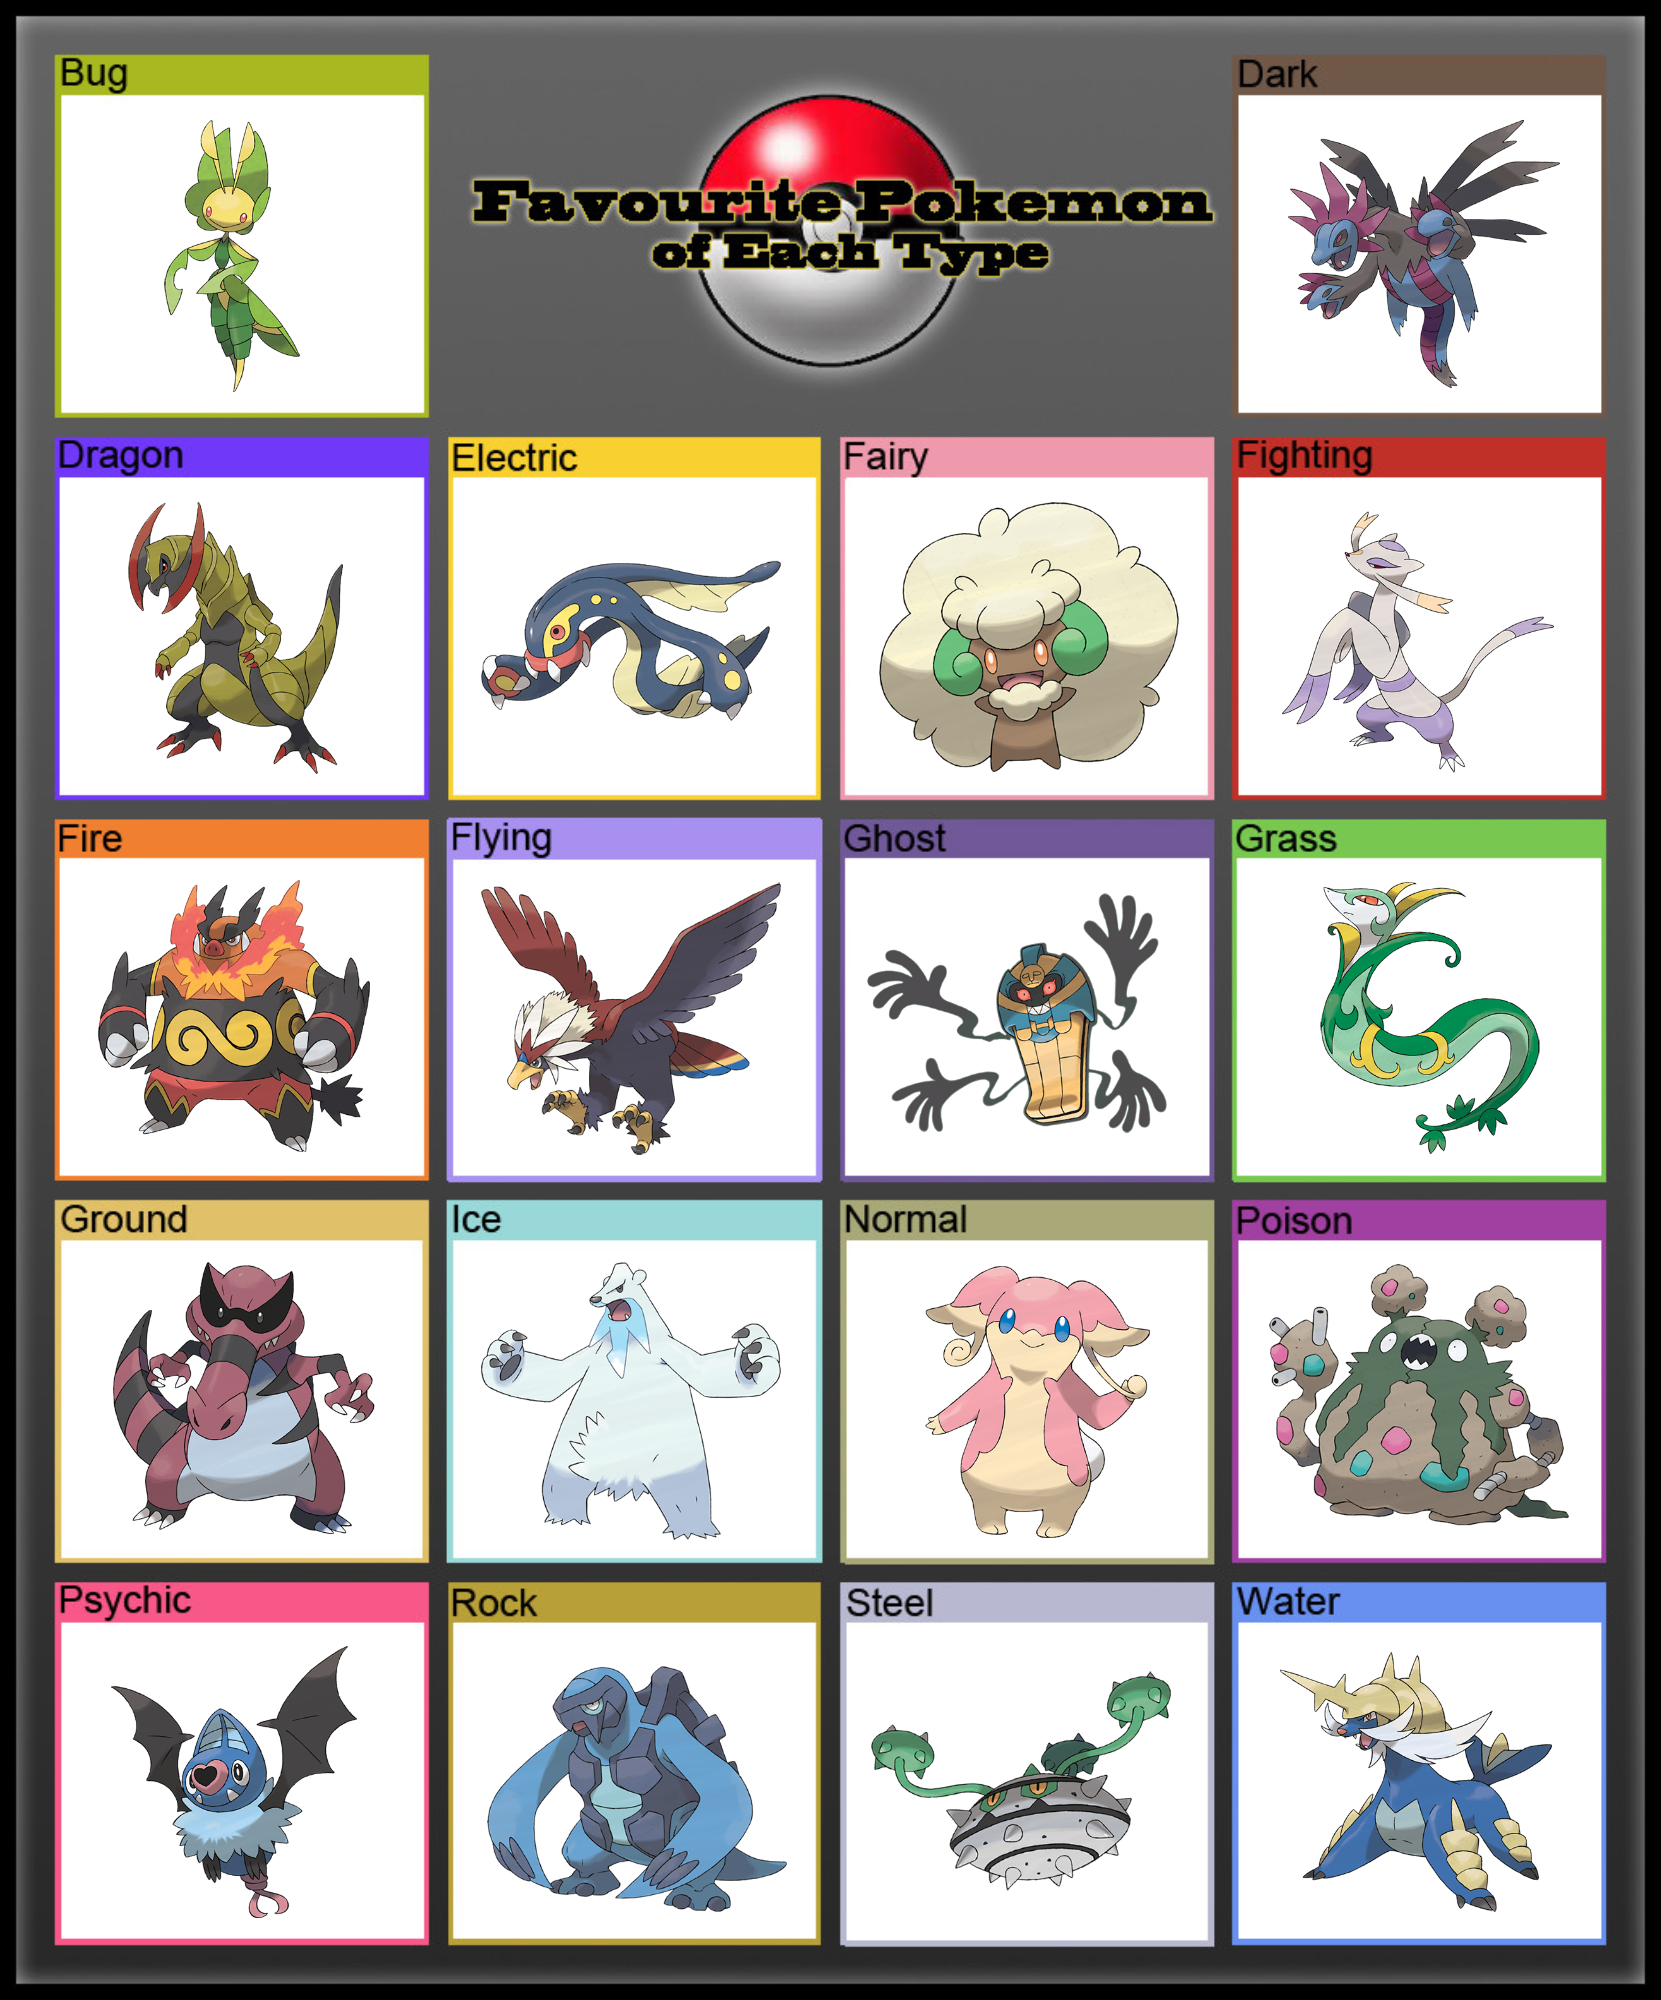 What is your favorite Pokémon from the last Decade? (Gen 5-8)